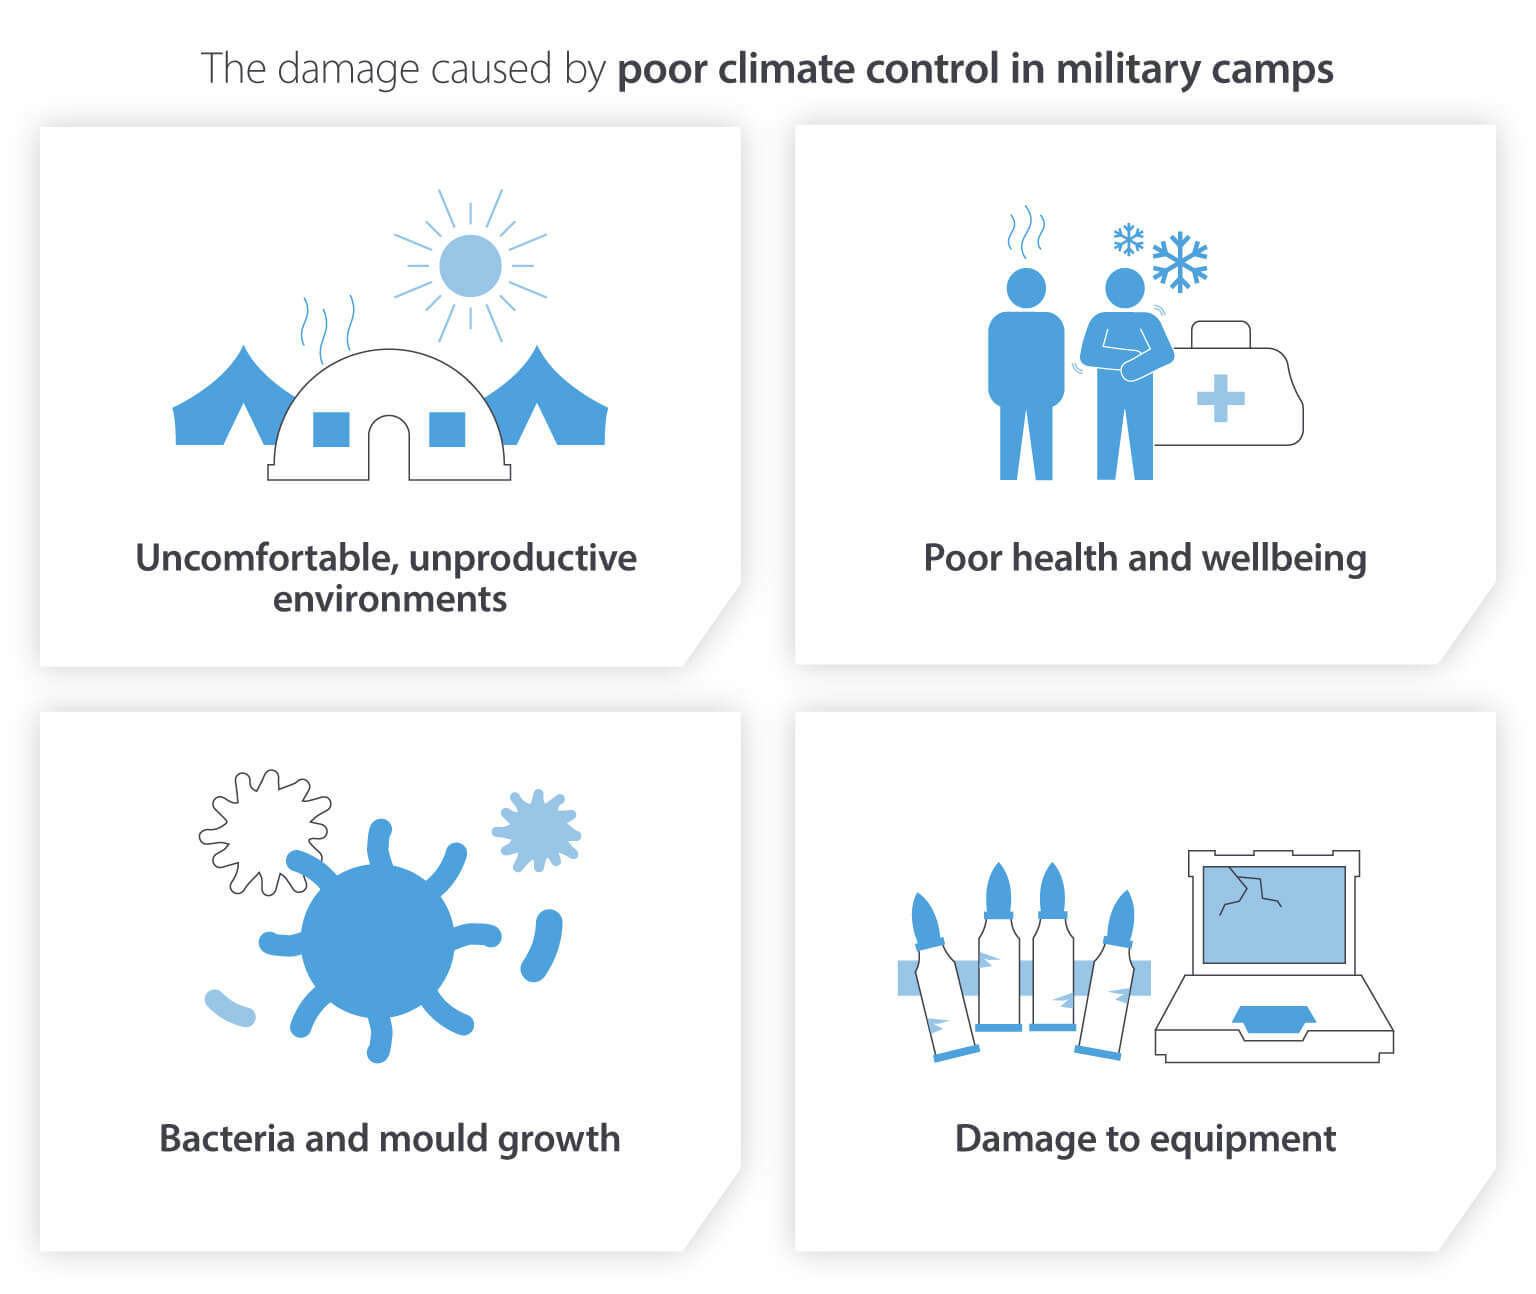 The damage caused by poor climate control in military camps